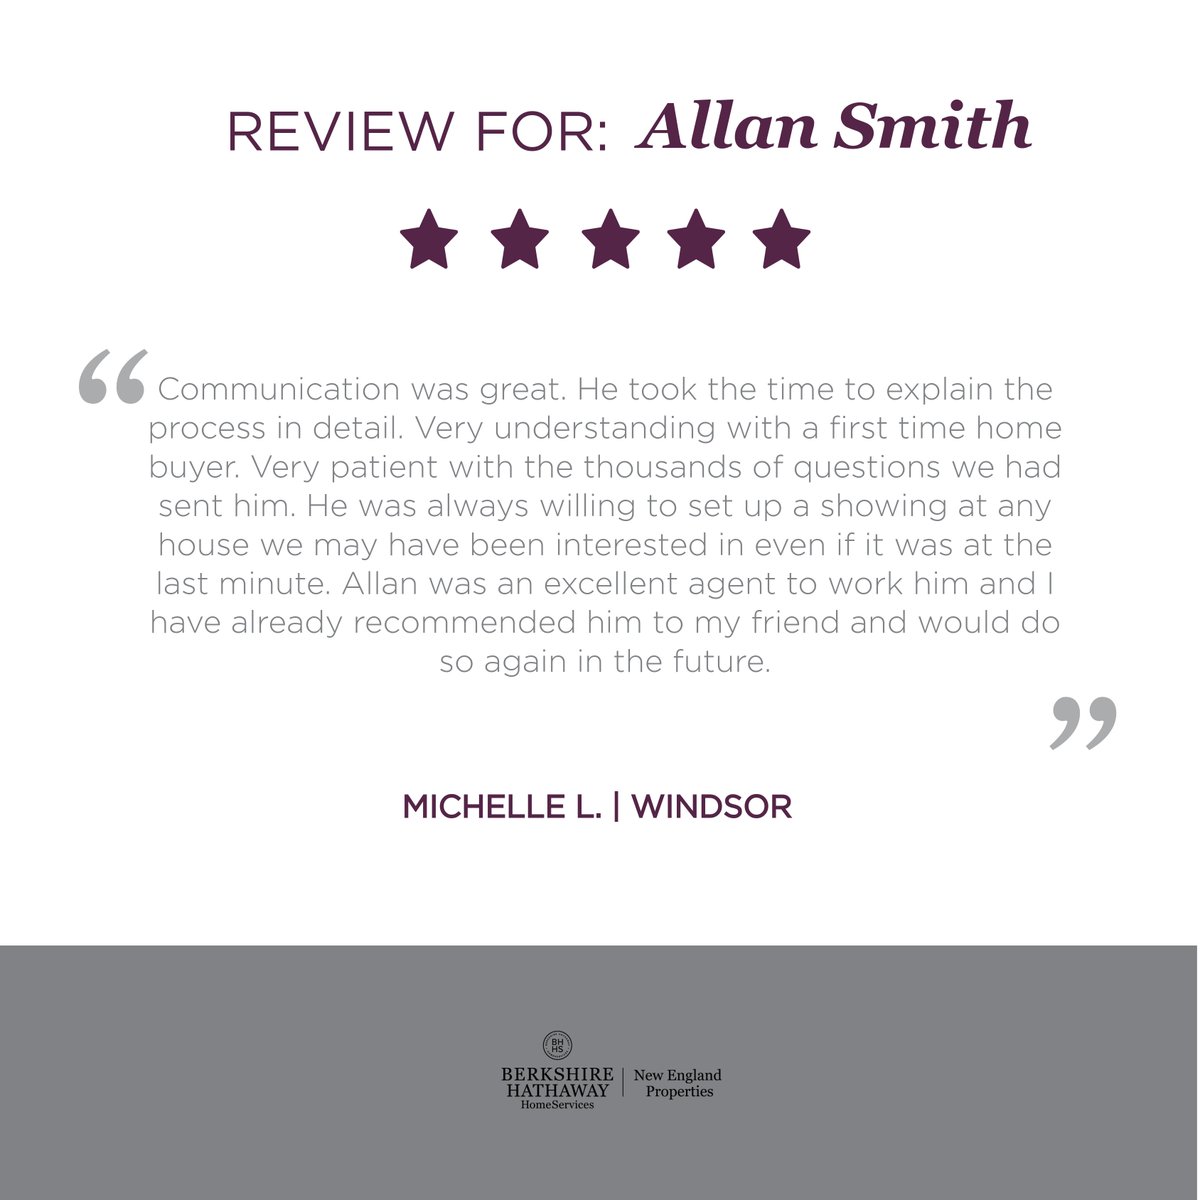 🏠🤝 Thank you so much to my amazing clients for their feedback and for choosing to work with me in purchasing their first home! 🏡😊 Your kind comments after the process make me feel more confident that I'm on... allansmith@bhhsne.com
💻MoveInCT.com
#CustomerFeedback